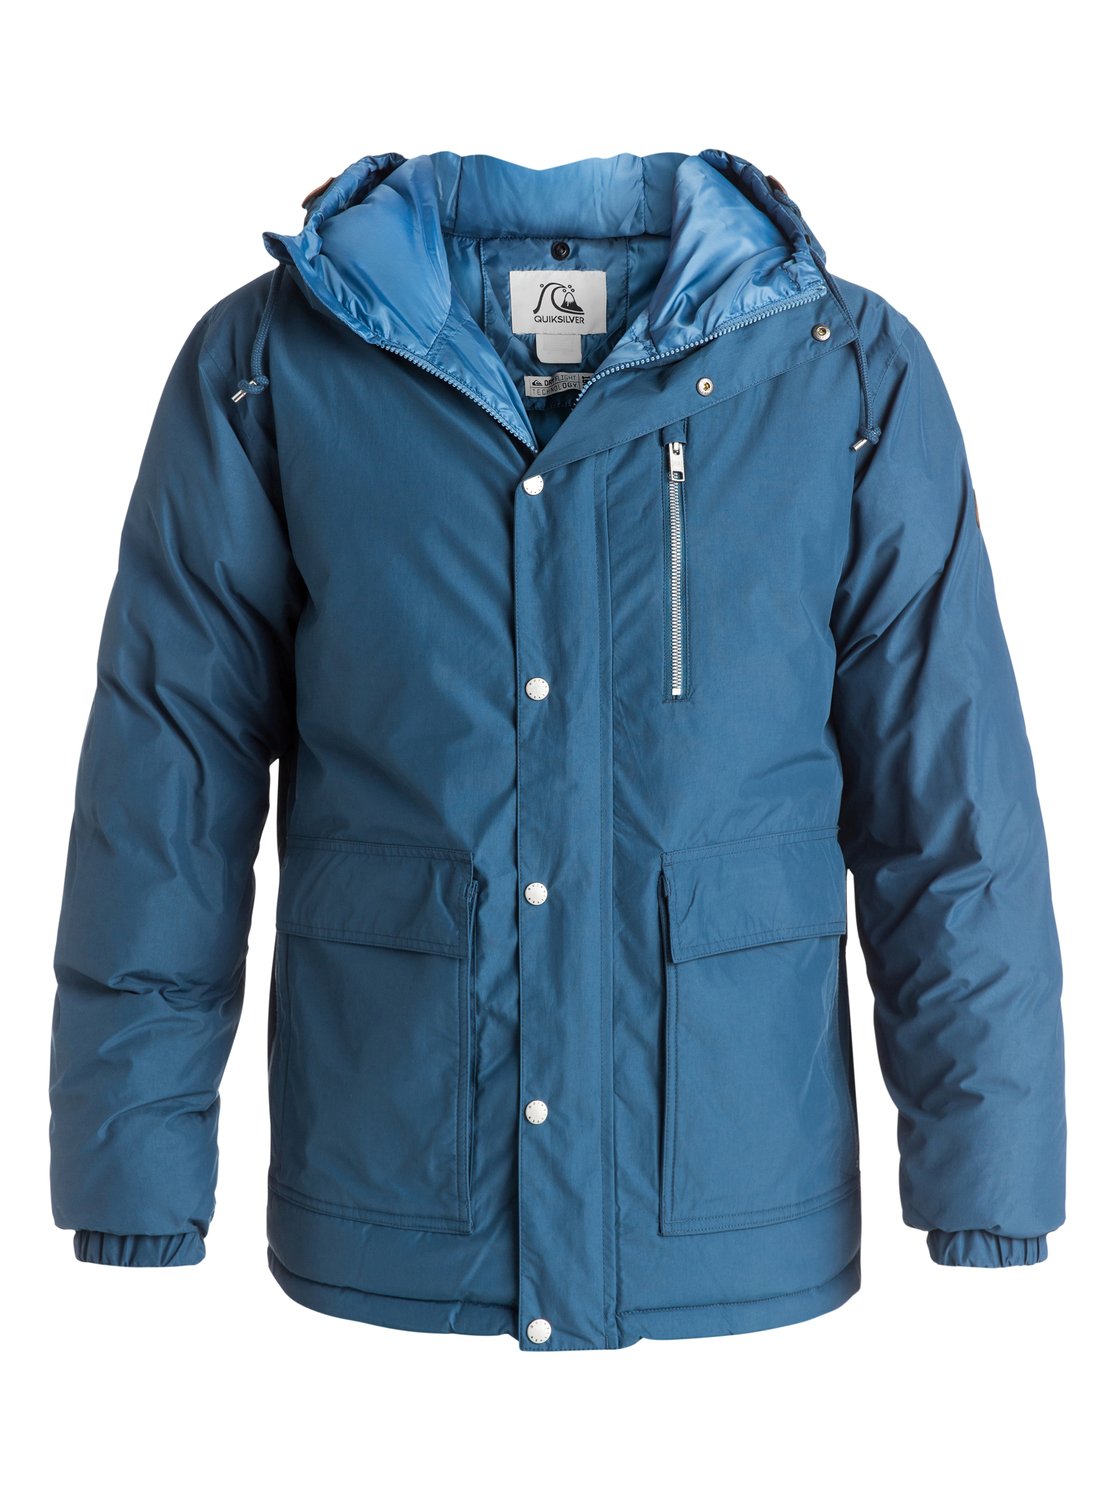 Role Reversible 10K Cold Weather Jacket EQYJK03125 | Quiksilver